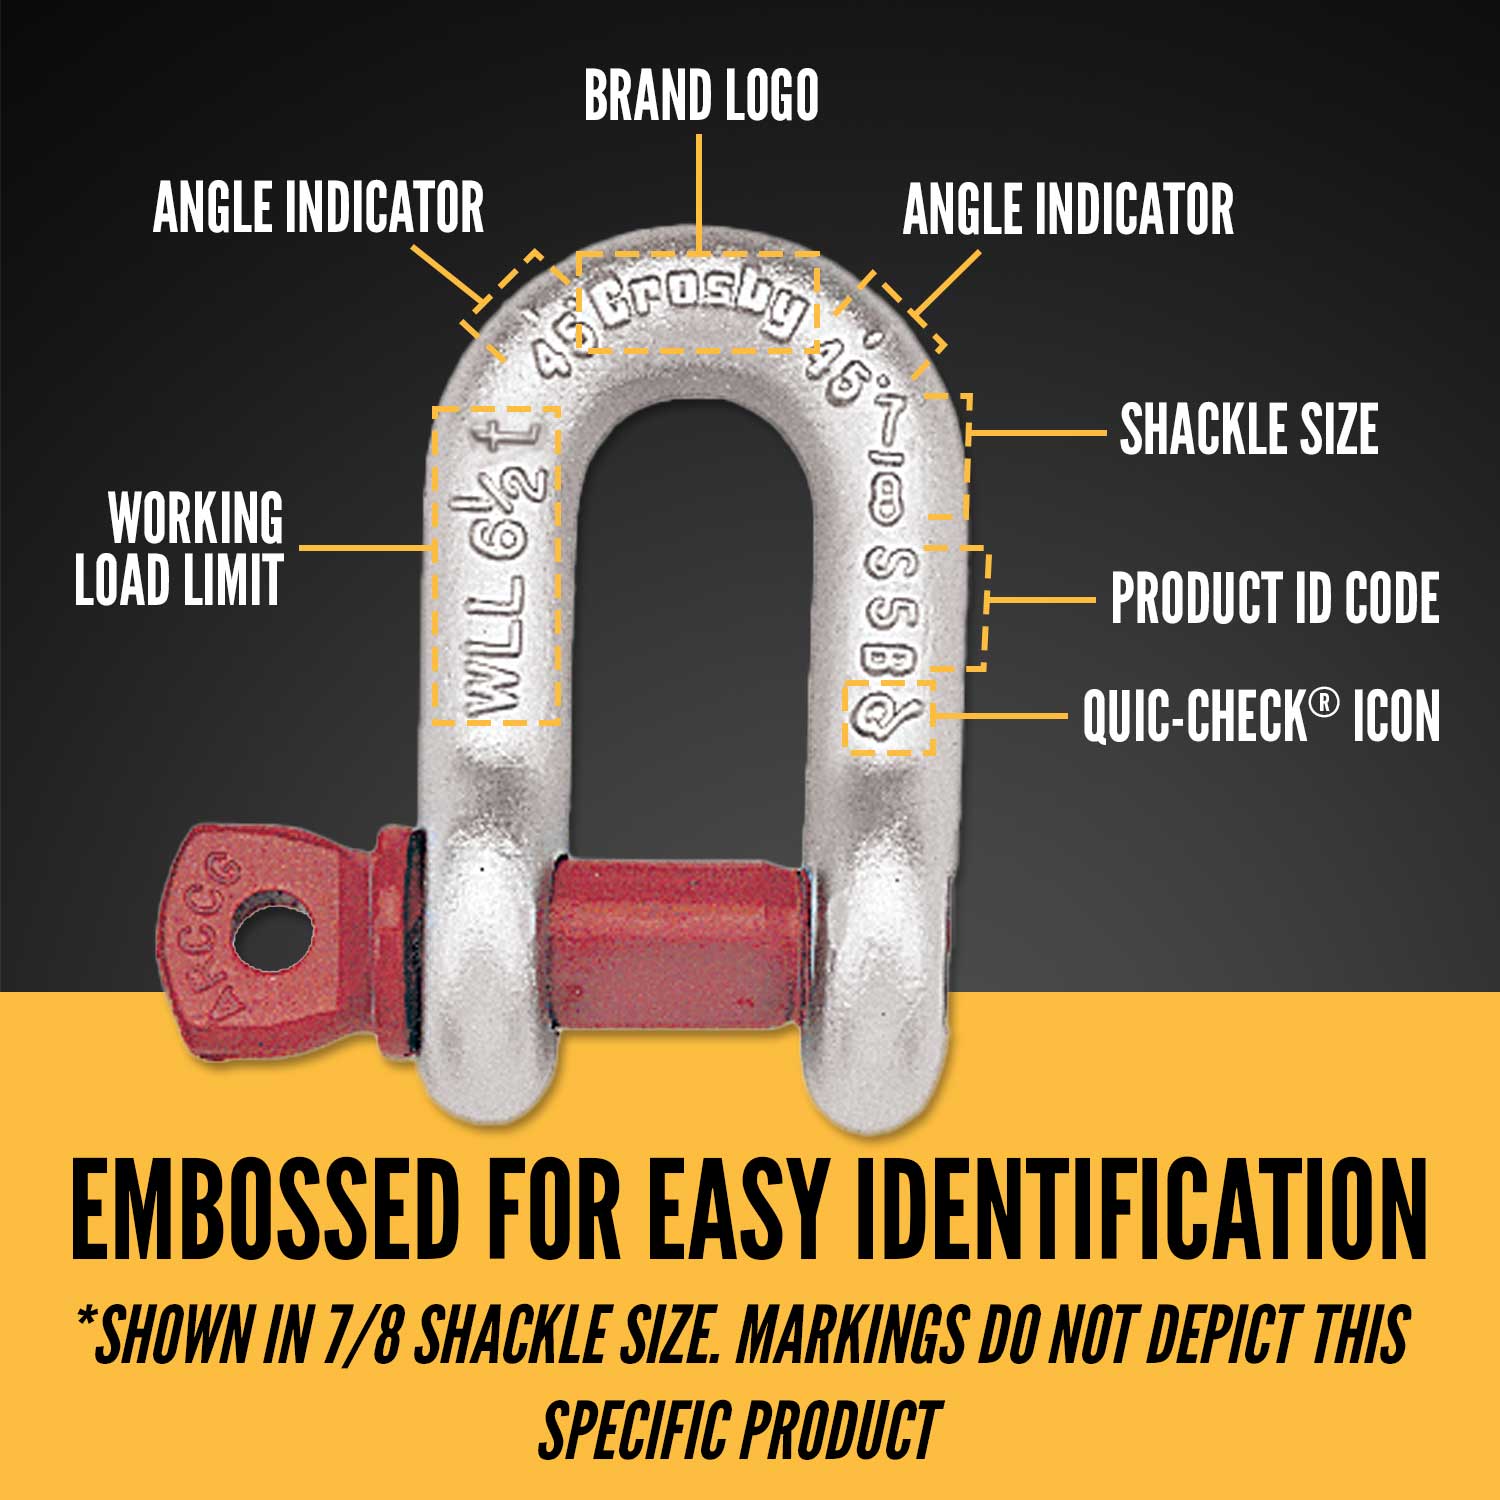 3/4" Crosby® Screw Pin Chain Shackle | G-210 - 4.75 Ton embossed for easy identification